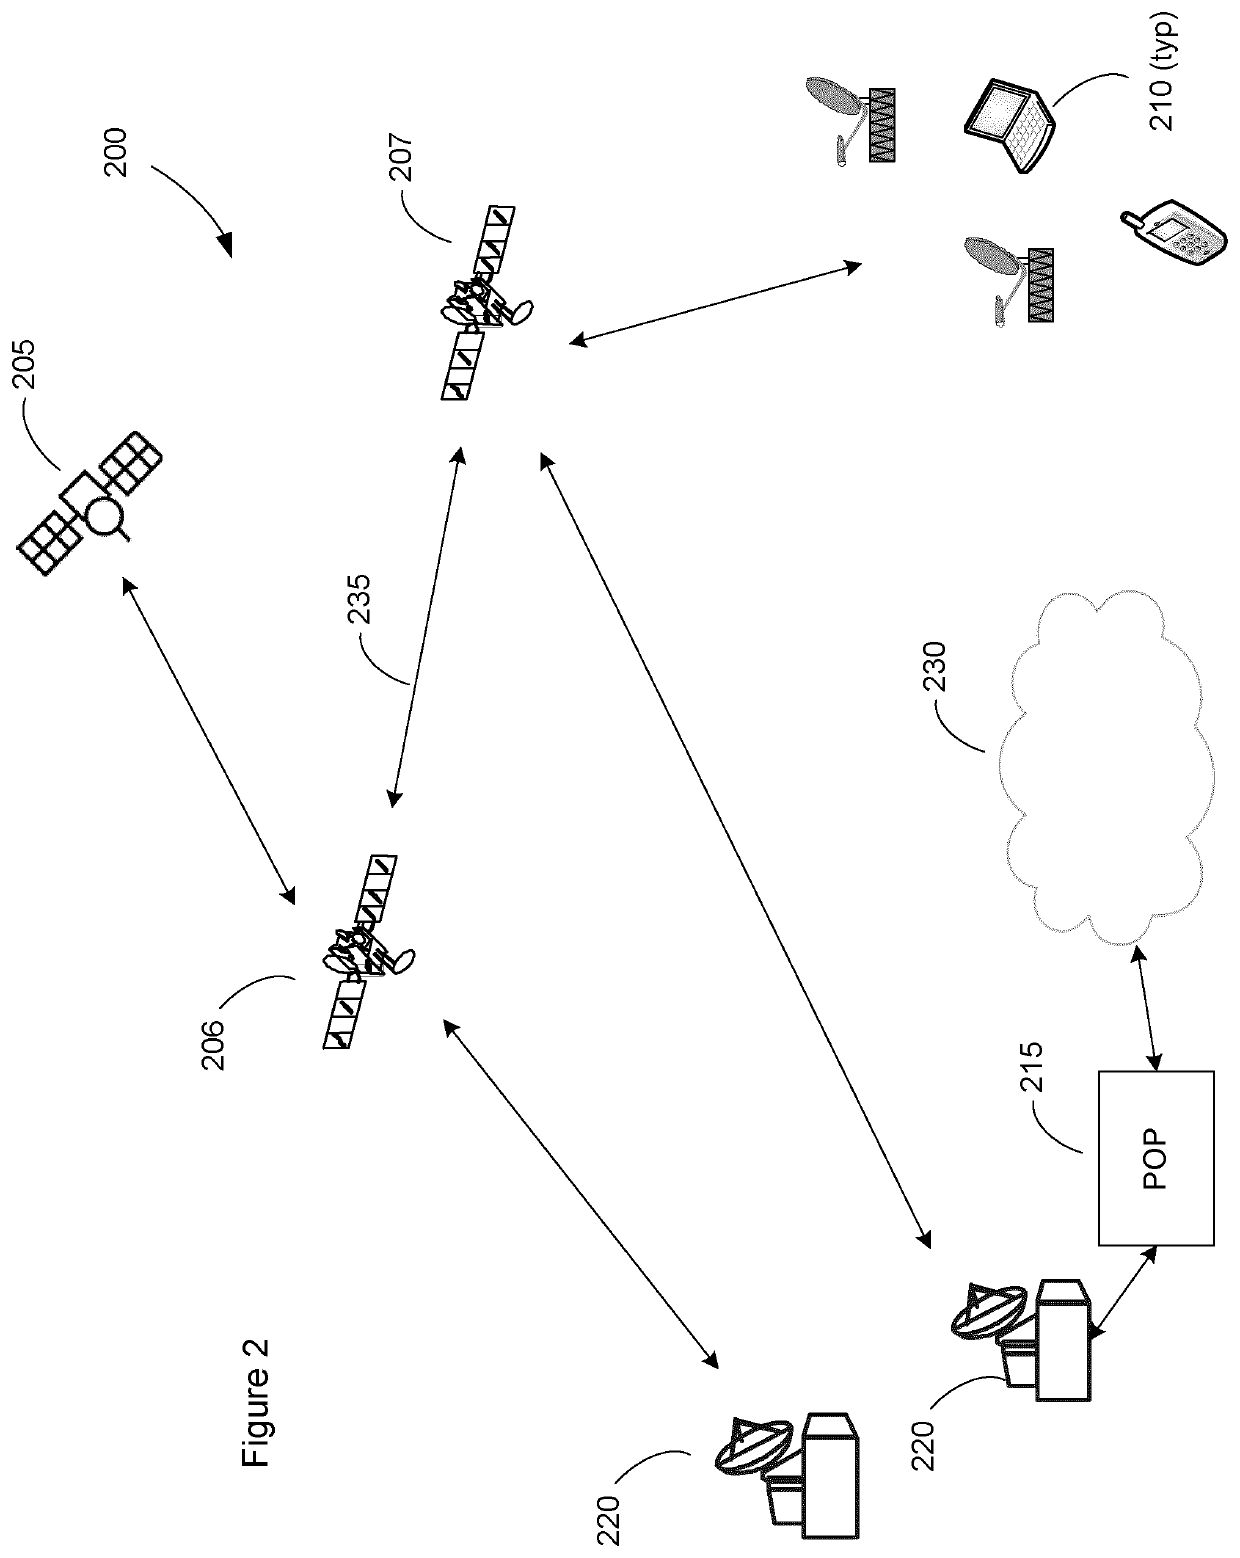 Resource deployment optimizer for non-geostationary and/or geostationary communications satellites